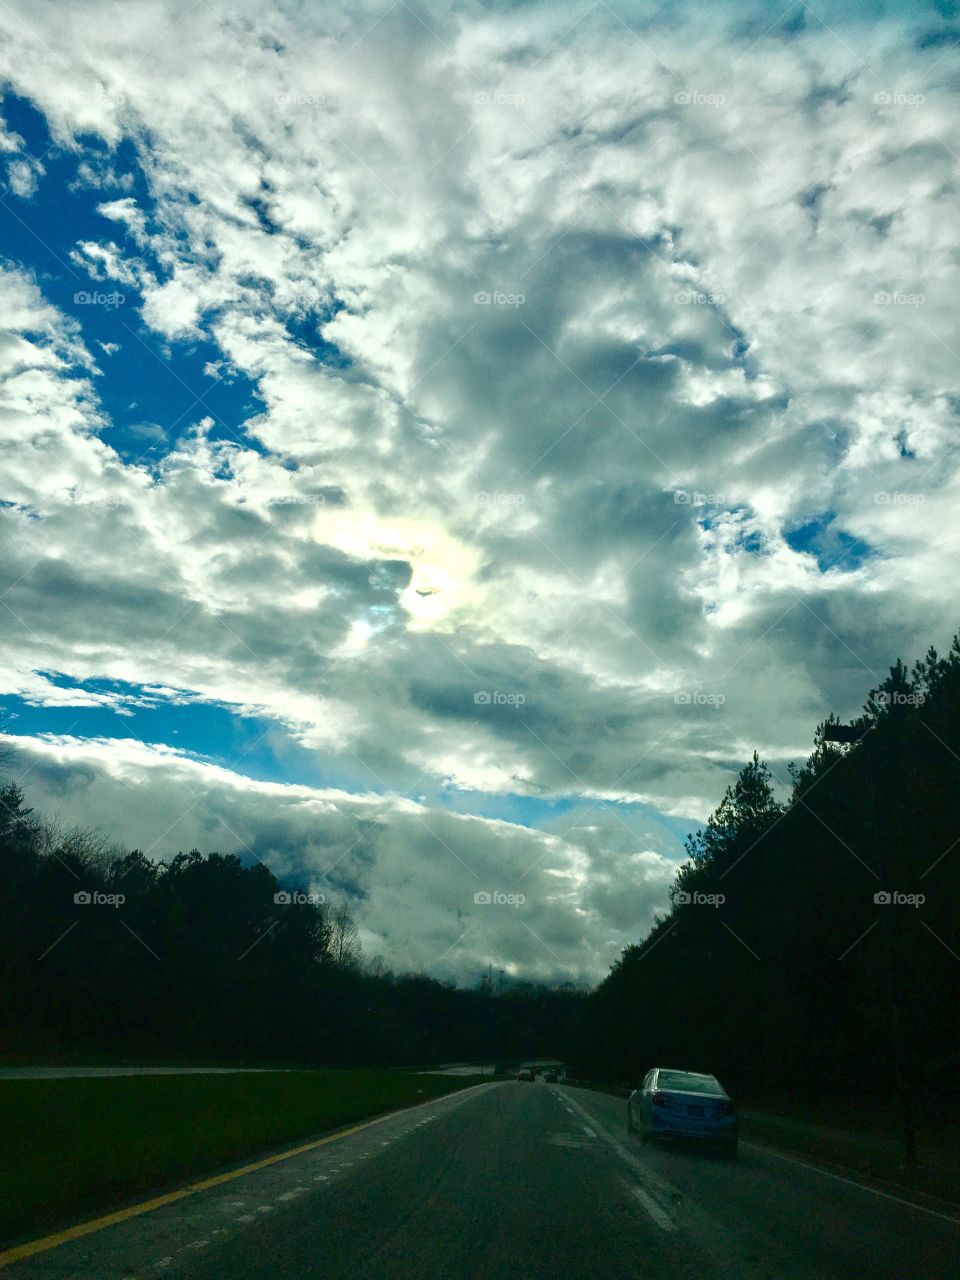 Cloudy drives post storm 